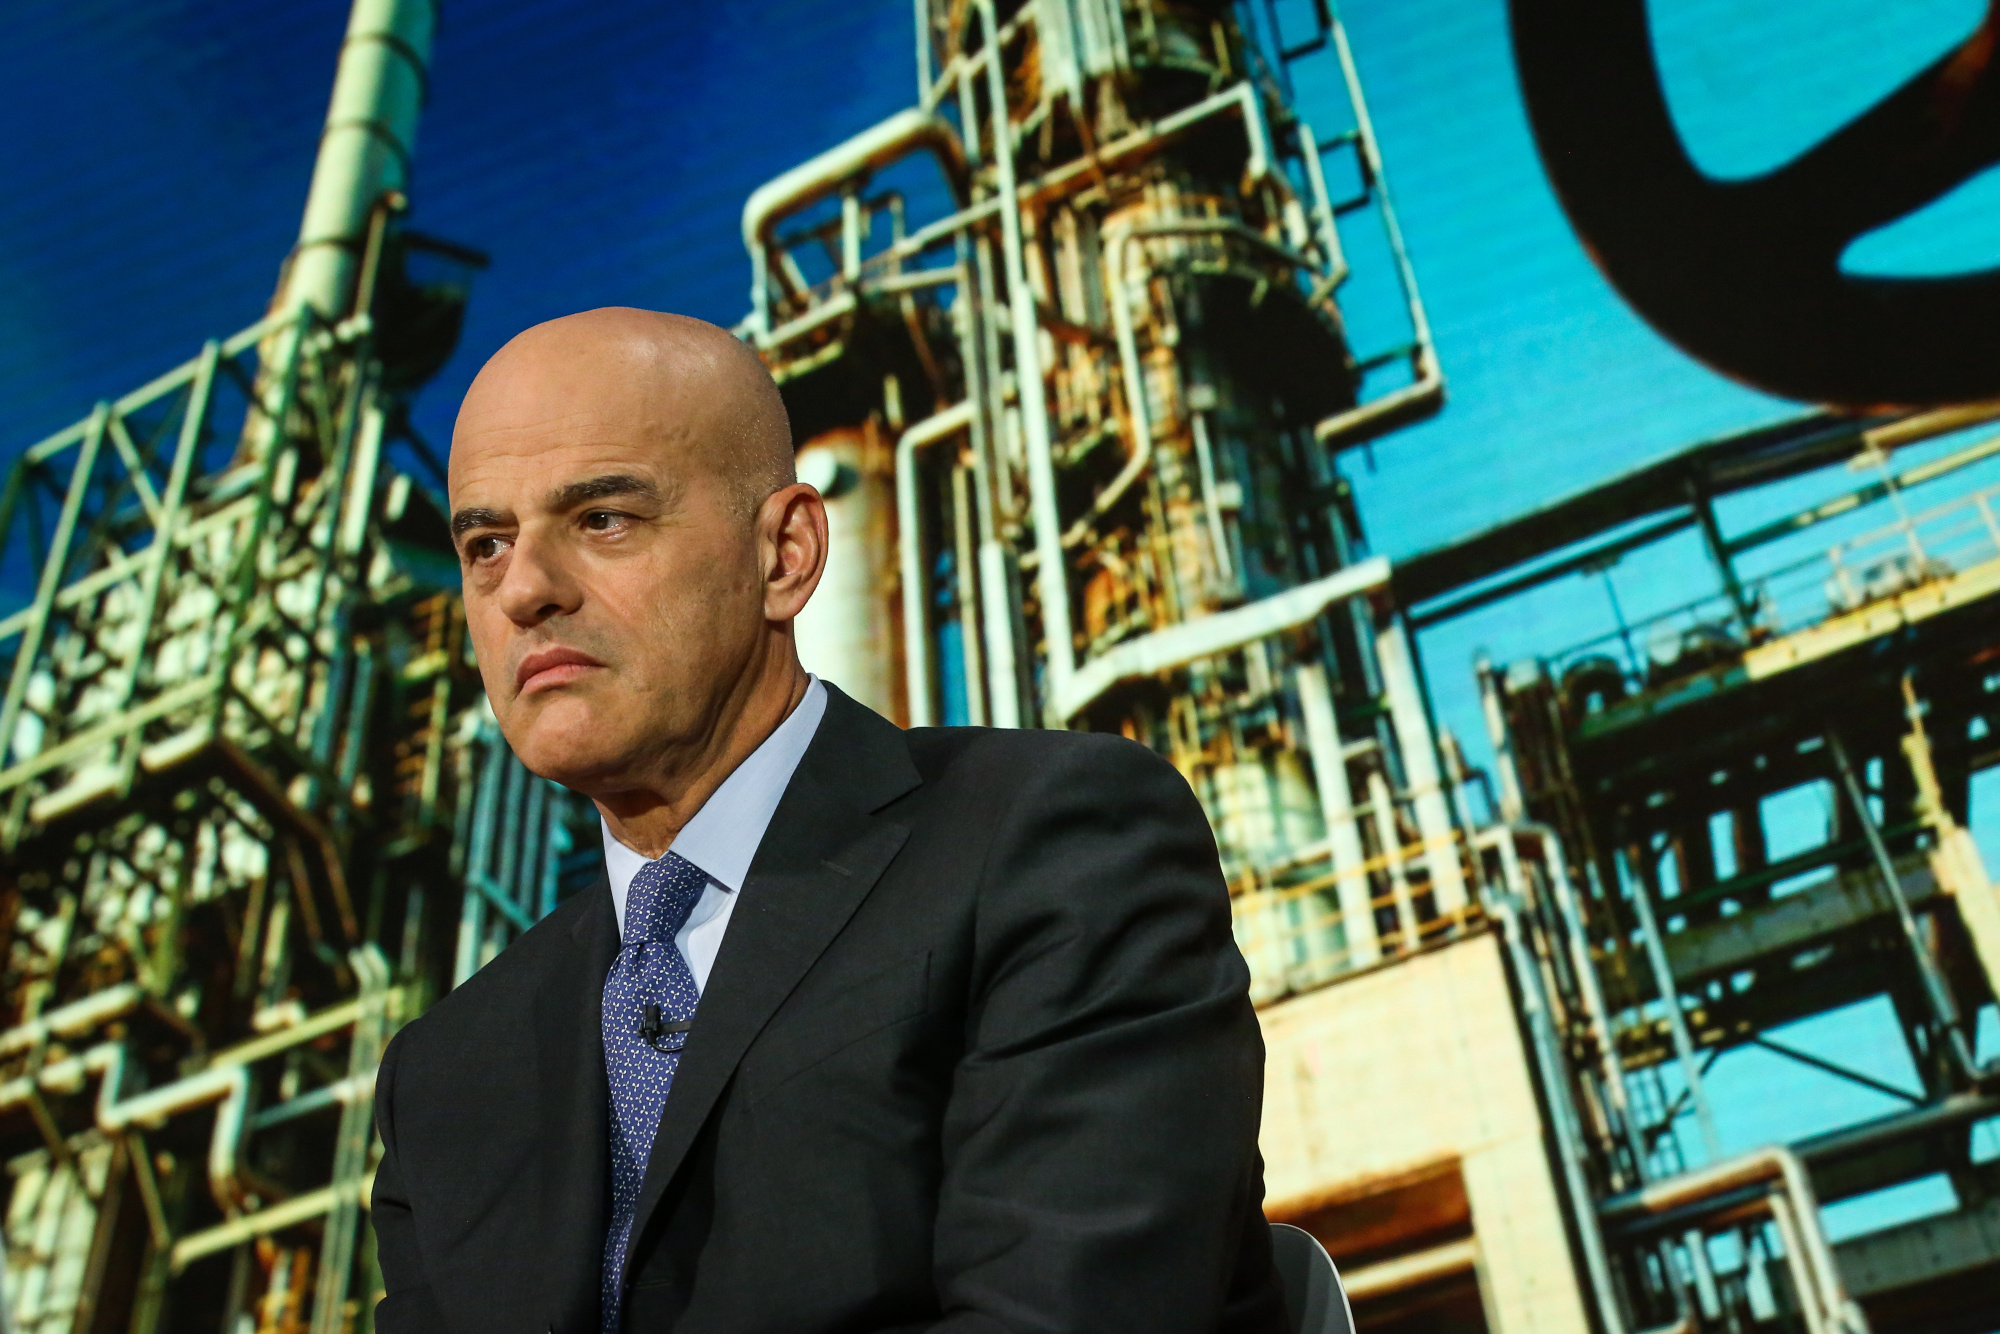 Claudio Descalzi, chief executive officer of Eni SpA,. Photographer: Christopher Goodney/Bloomberg